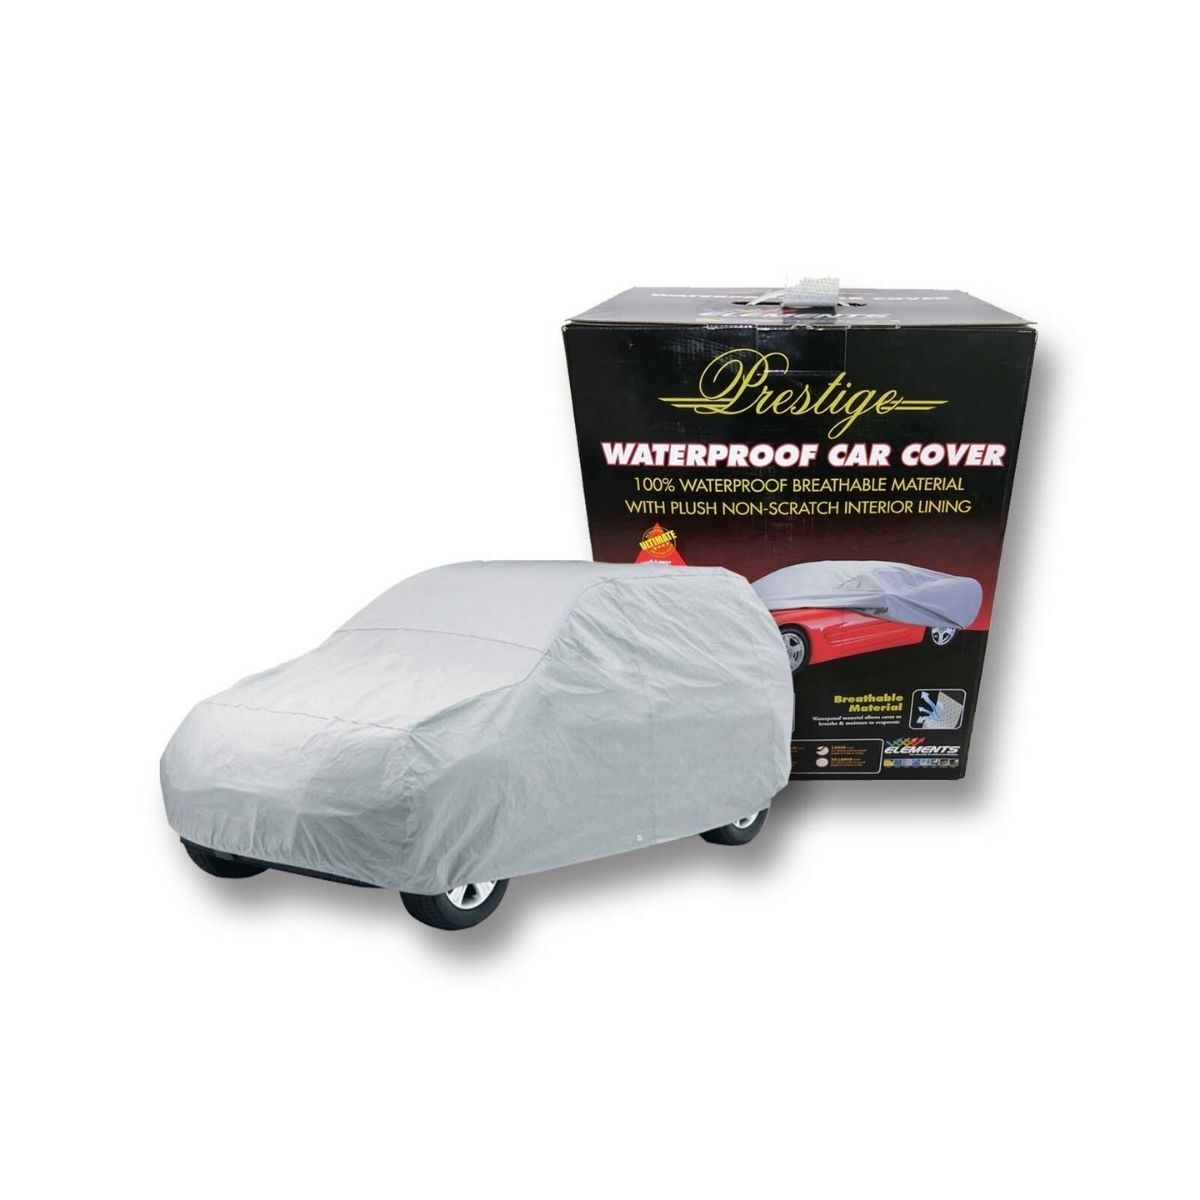 SMALL HATCHBACK PRESTIGE WATERPROOF CAR COVER up to 4.06m MAZDA 2